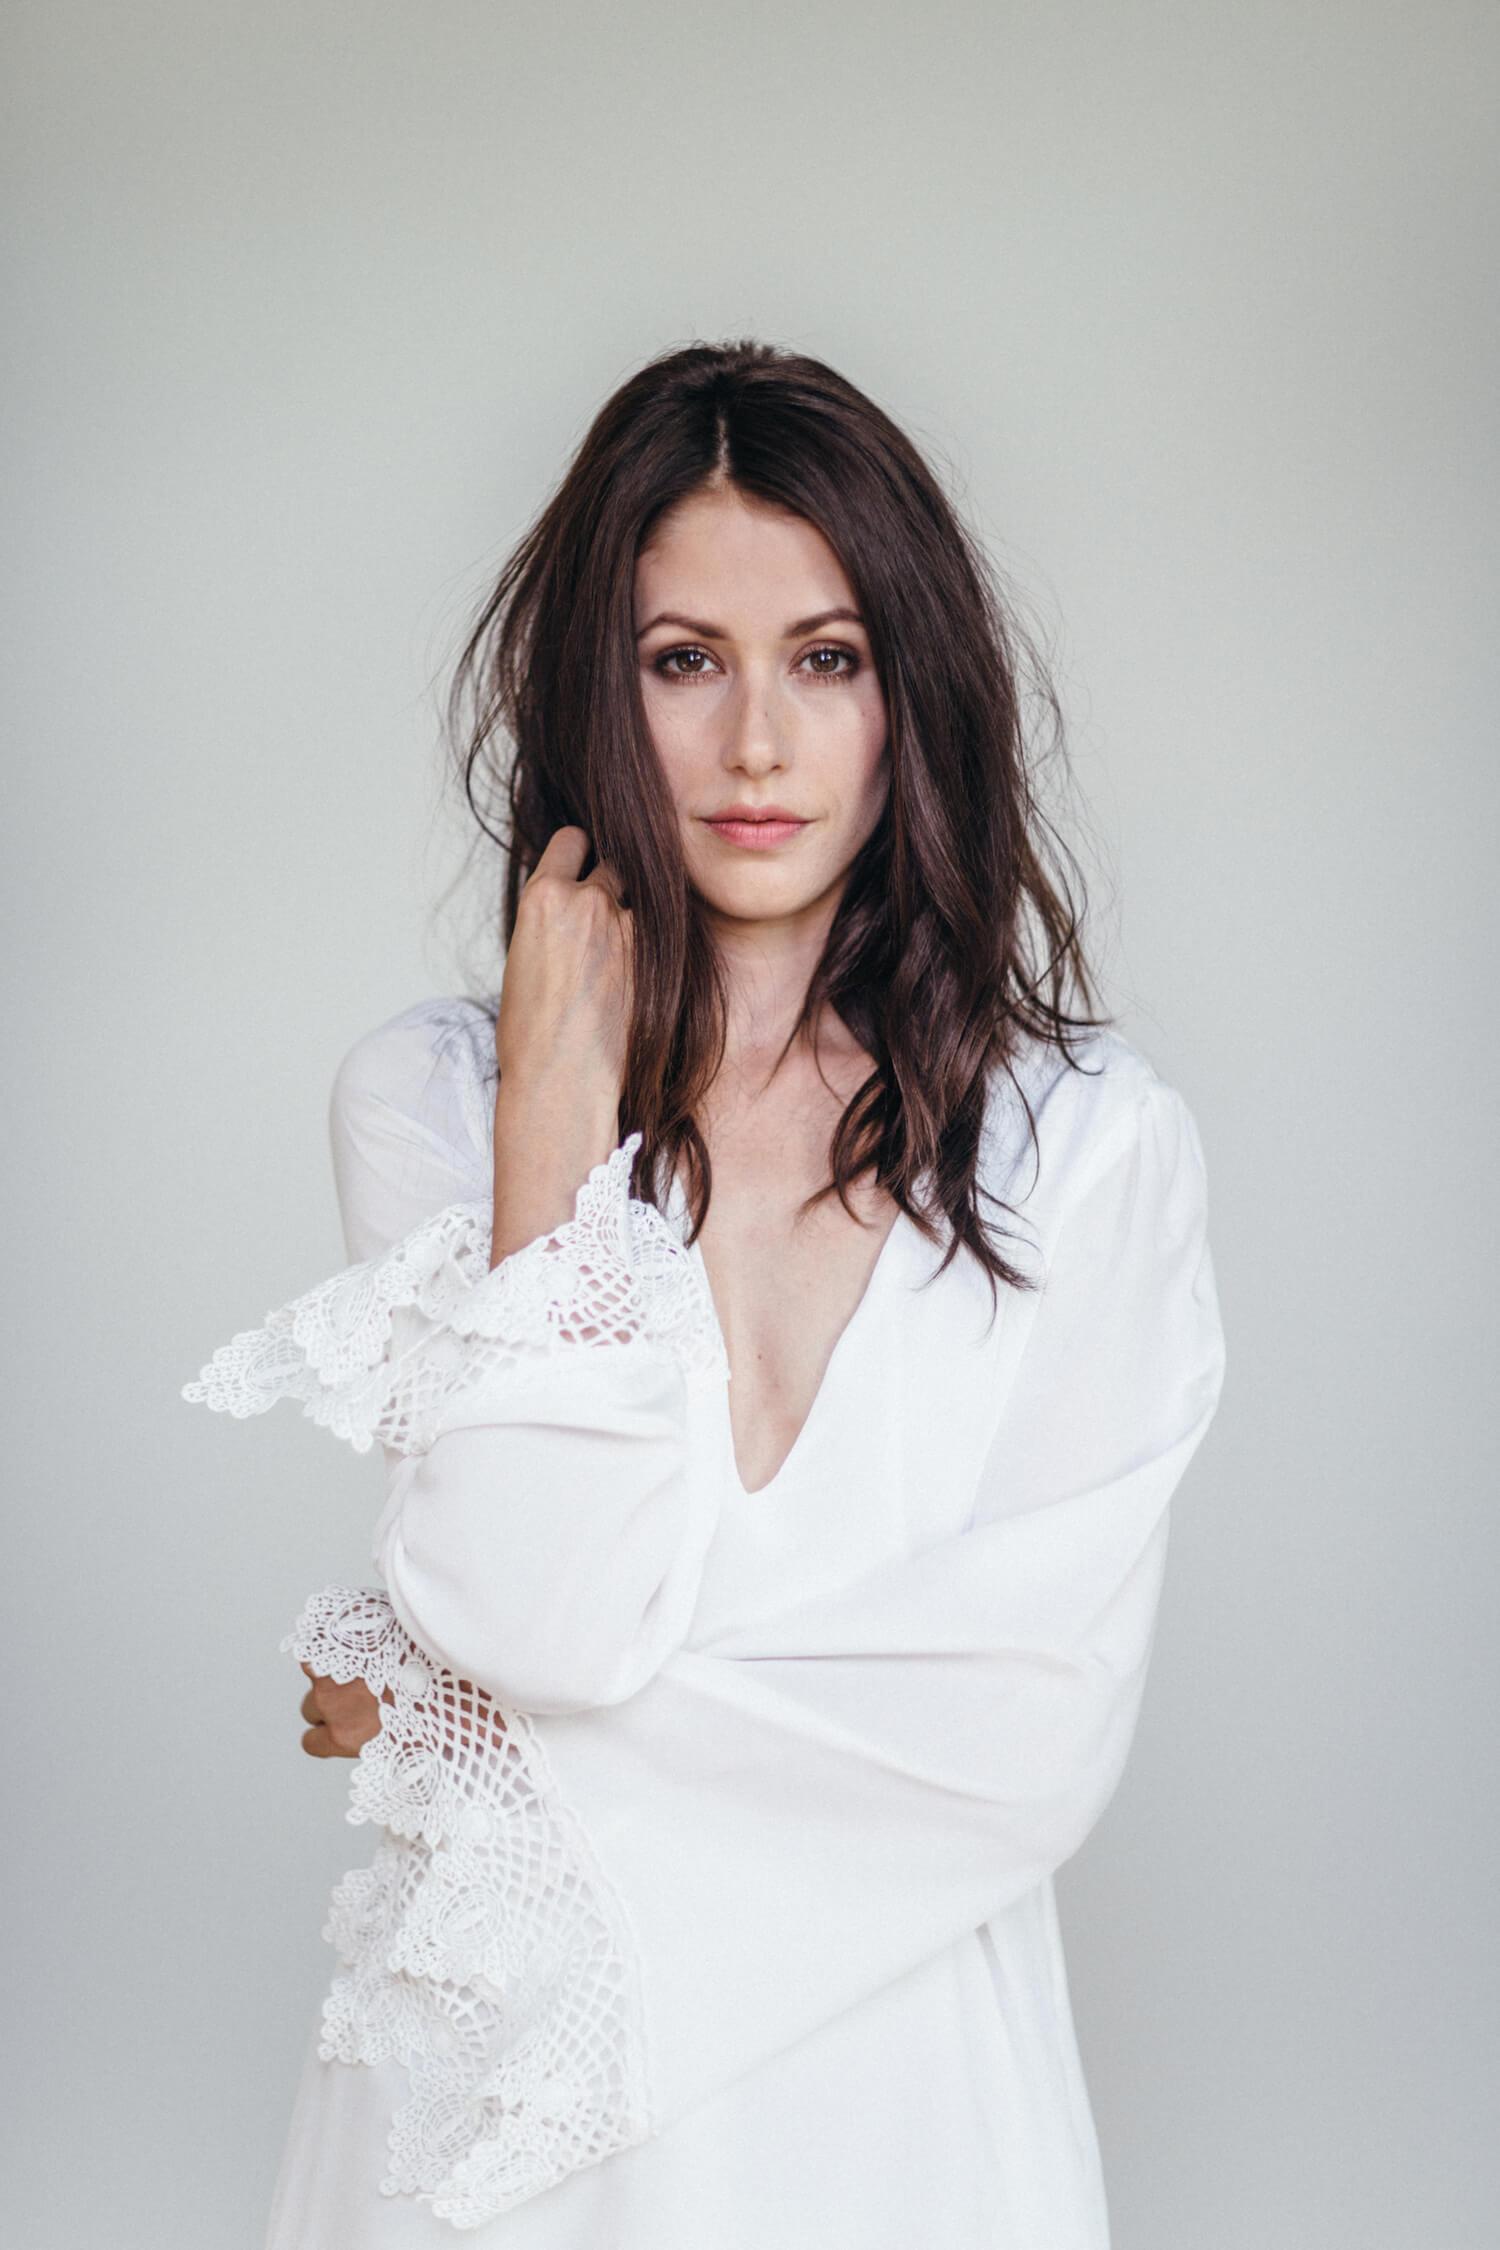 60+ Hot Pictures Of Amanda Crew Which Will Rock Your World | Best Of Comic Books